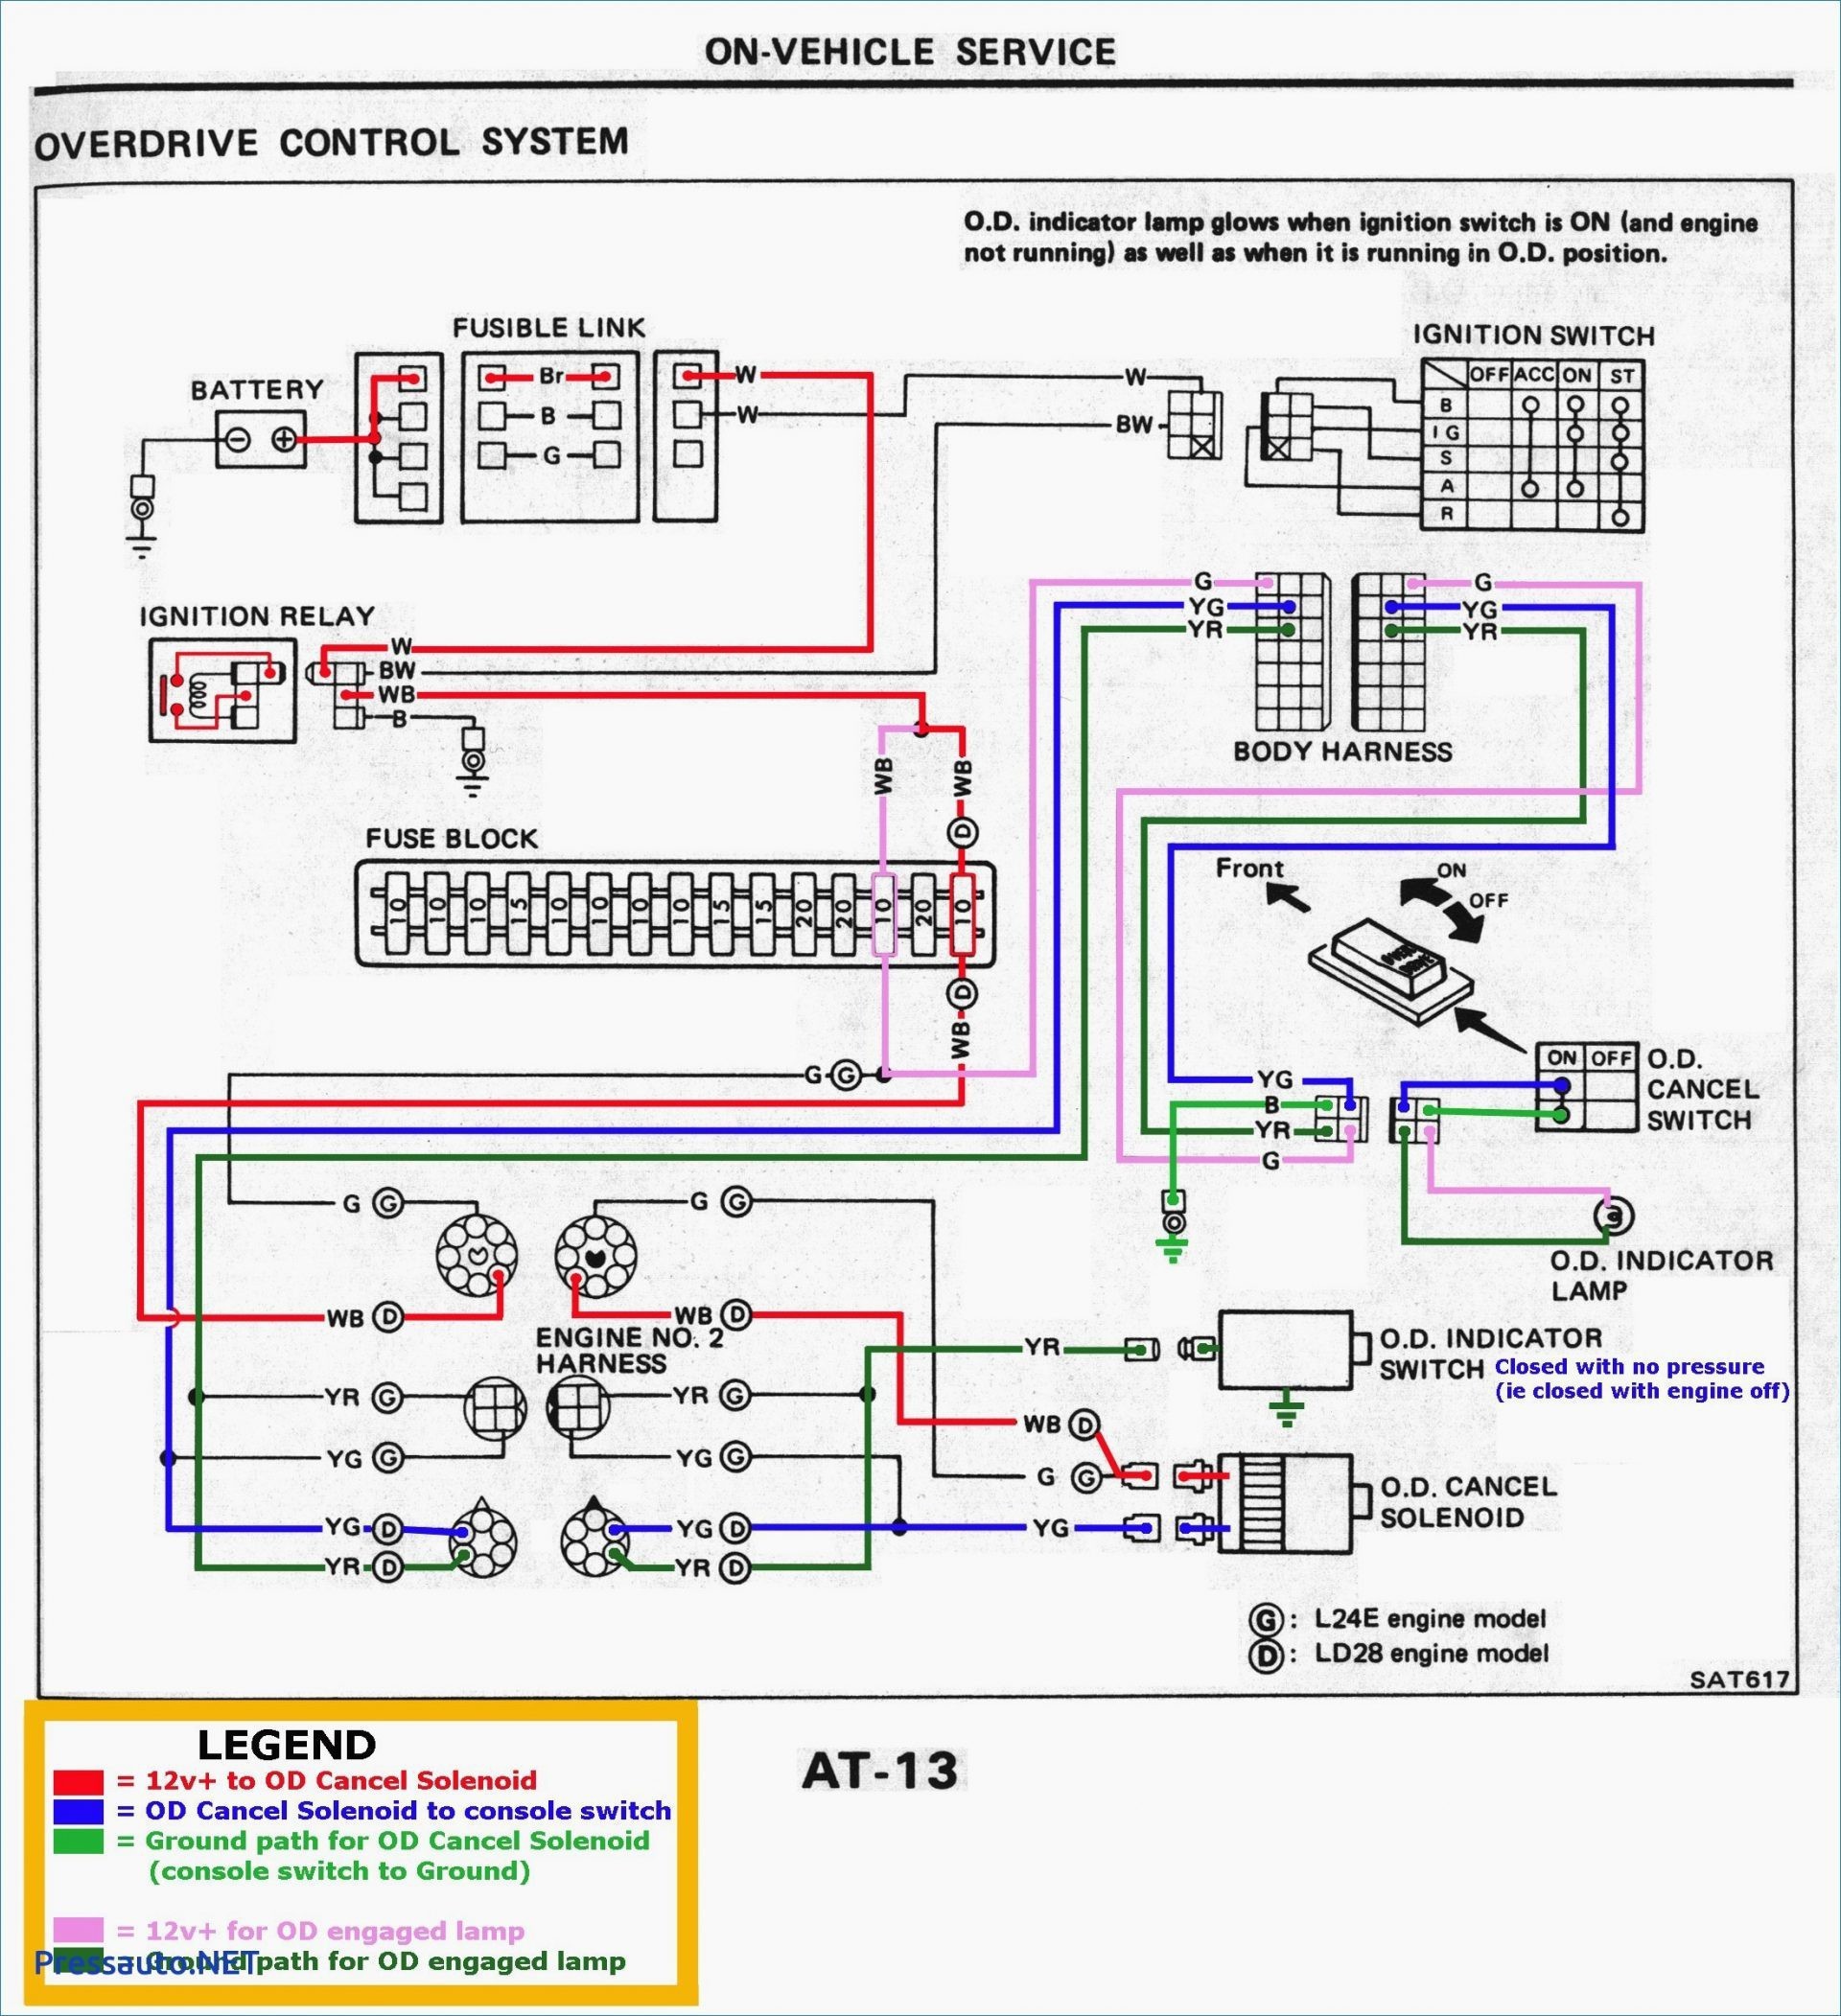 Ford F150 Tail Light Wiring Diagram Wiring Diagram Rj45 Archives Joescablecar Of Ford F150 Tail Light Wiring Diagram